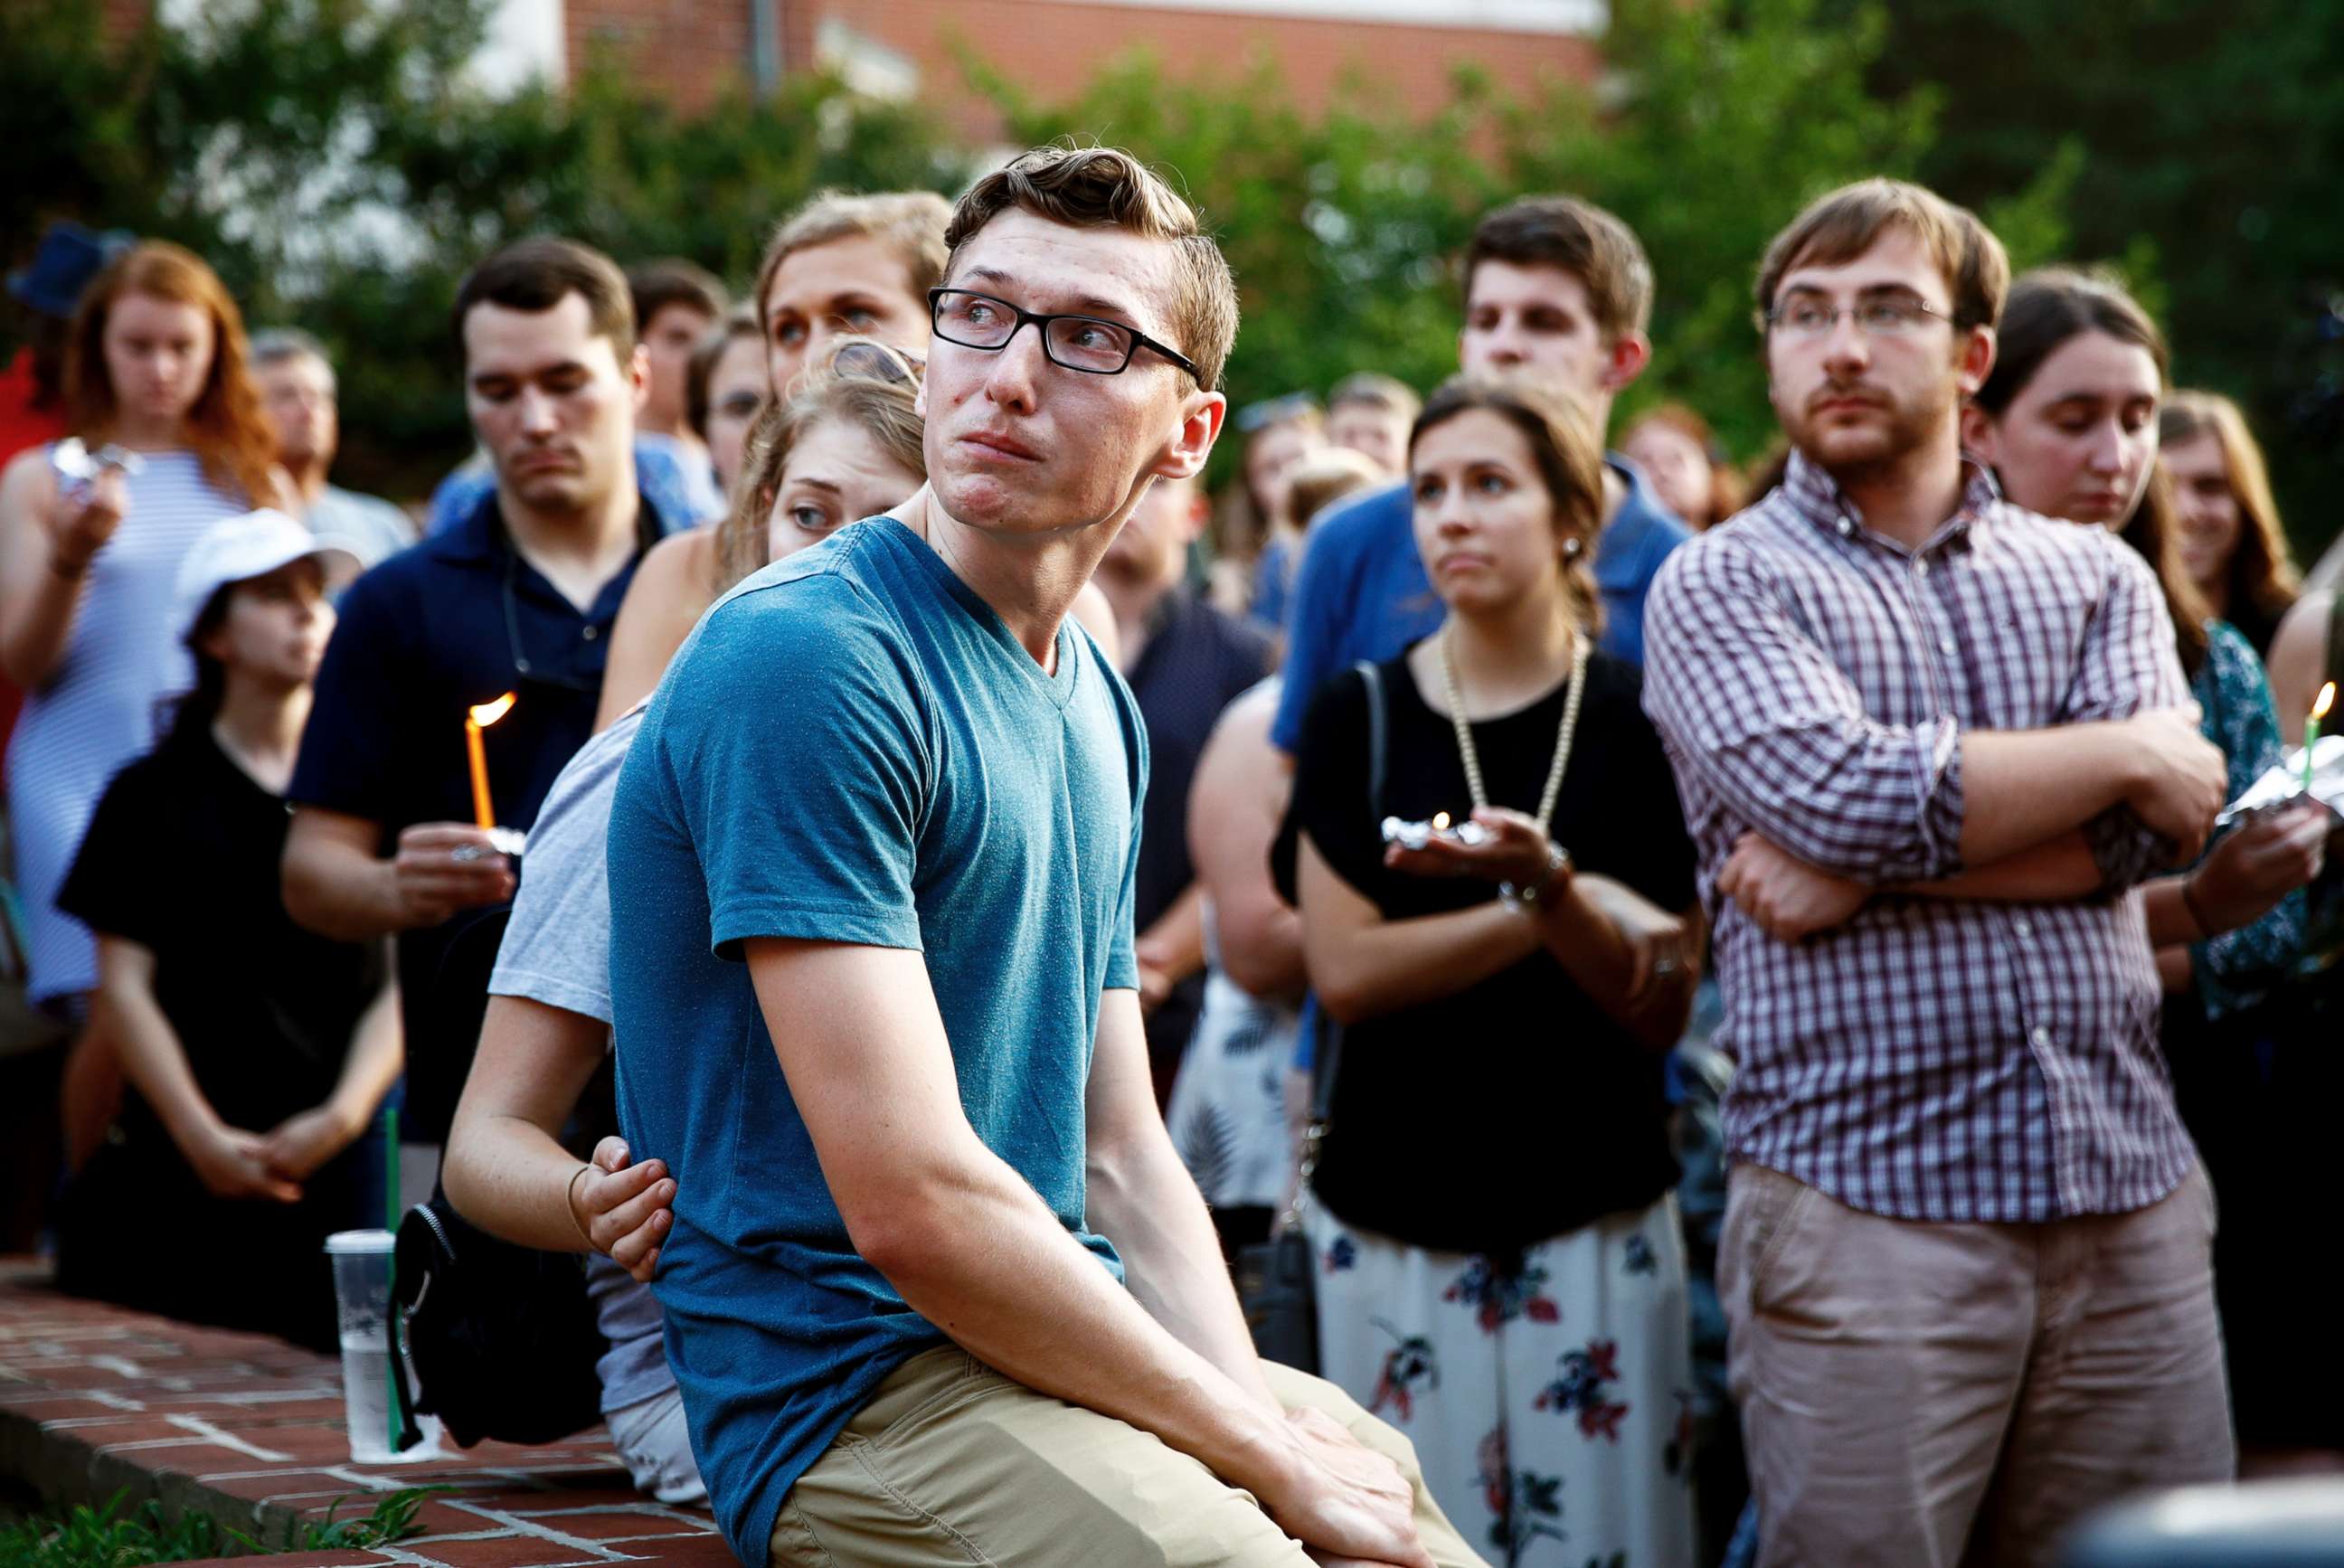 PHOTO: People gather for a vigil in response to a shooting in the Capital Gazette newsroom on June 29, 2018, in Annapolis, Md.